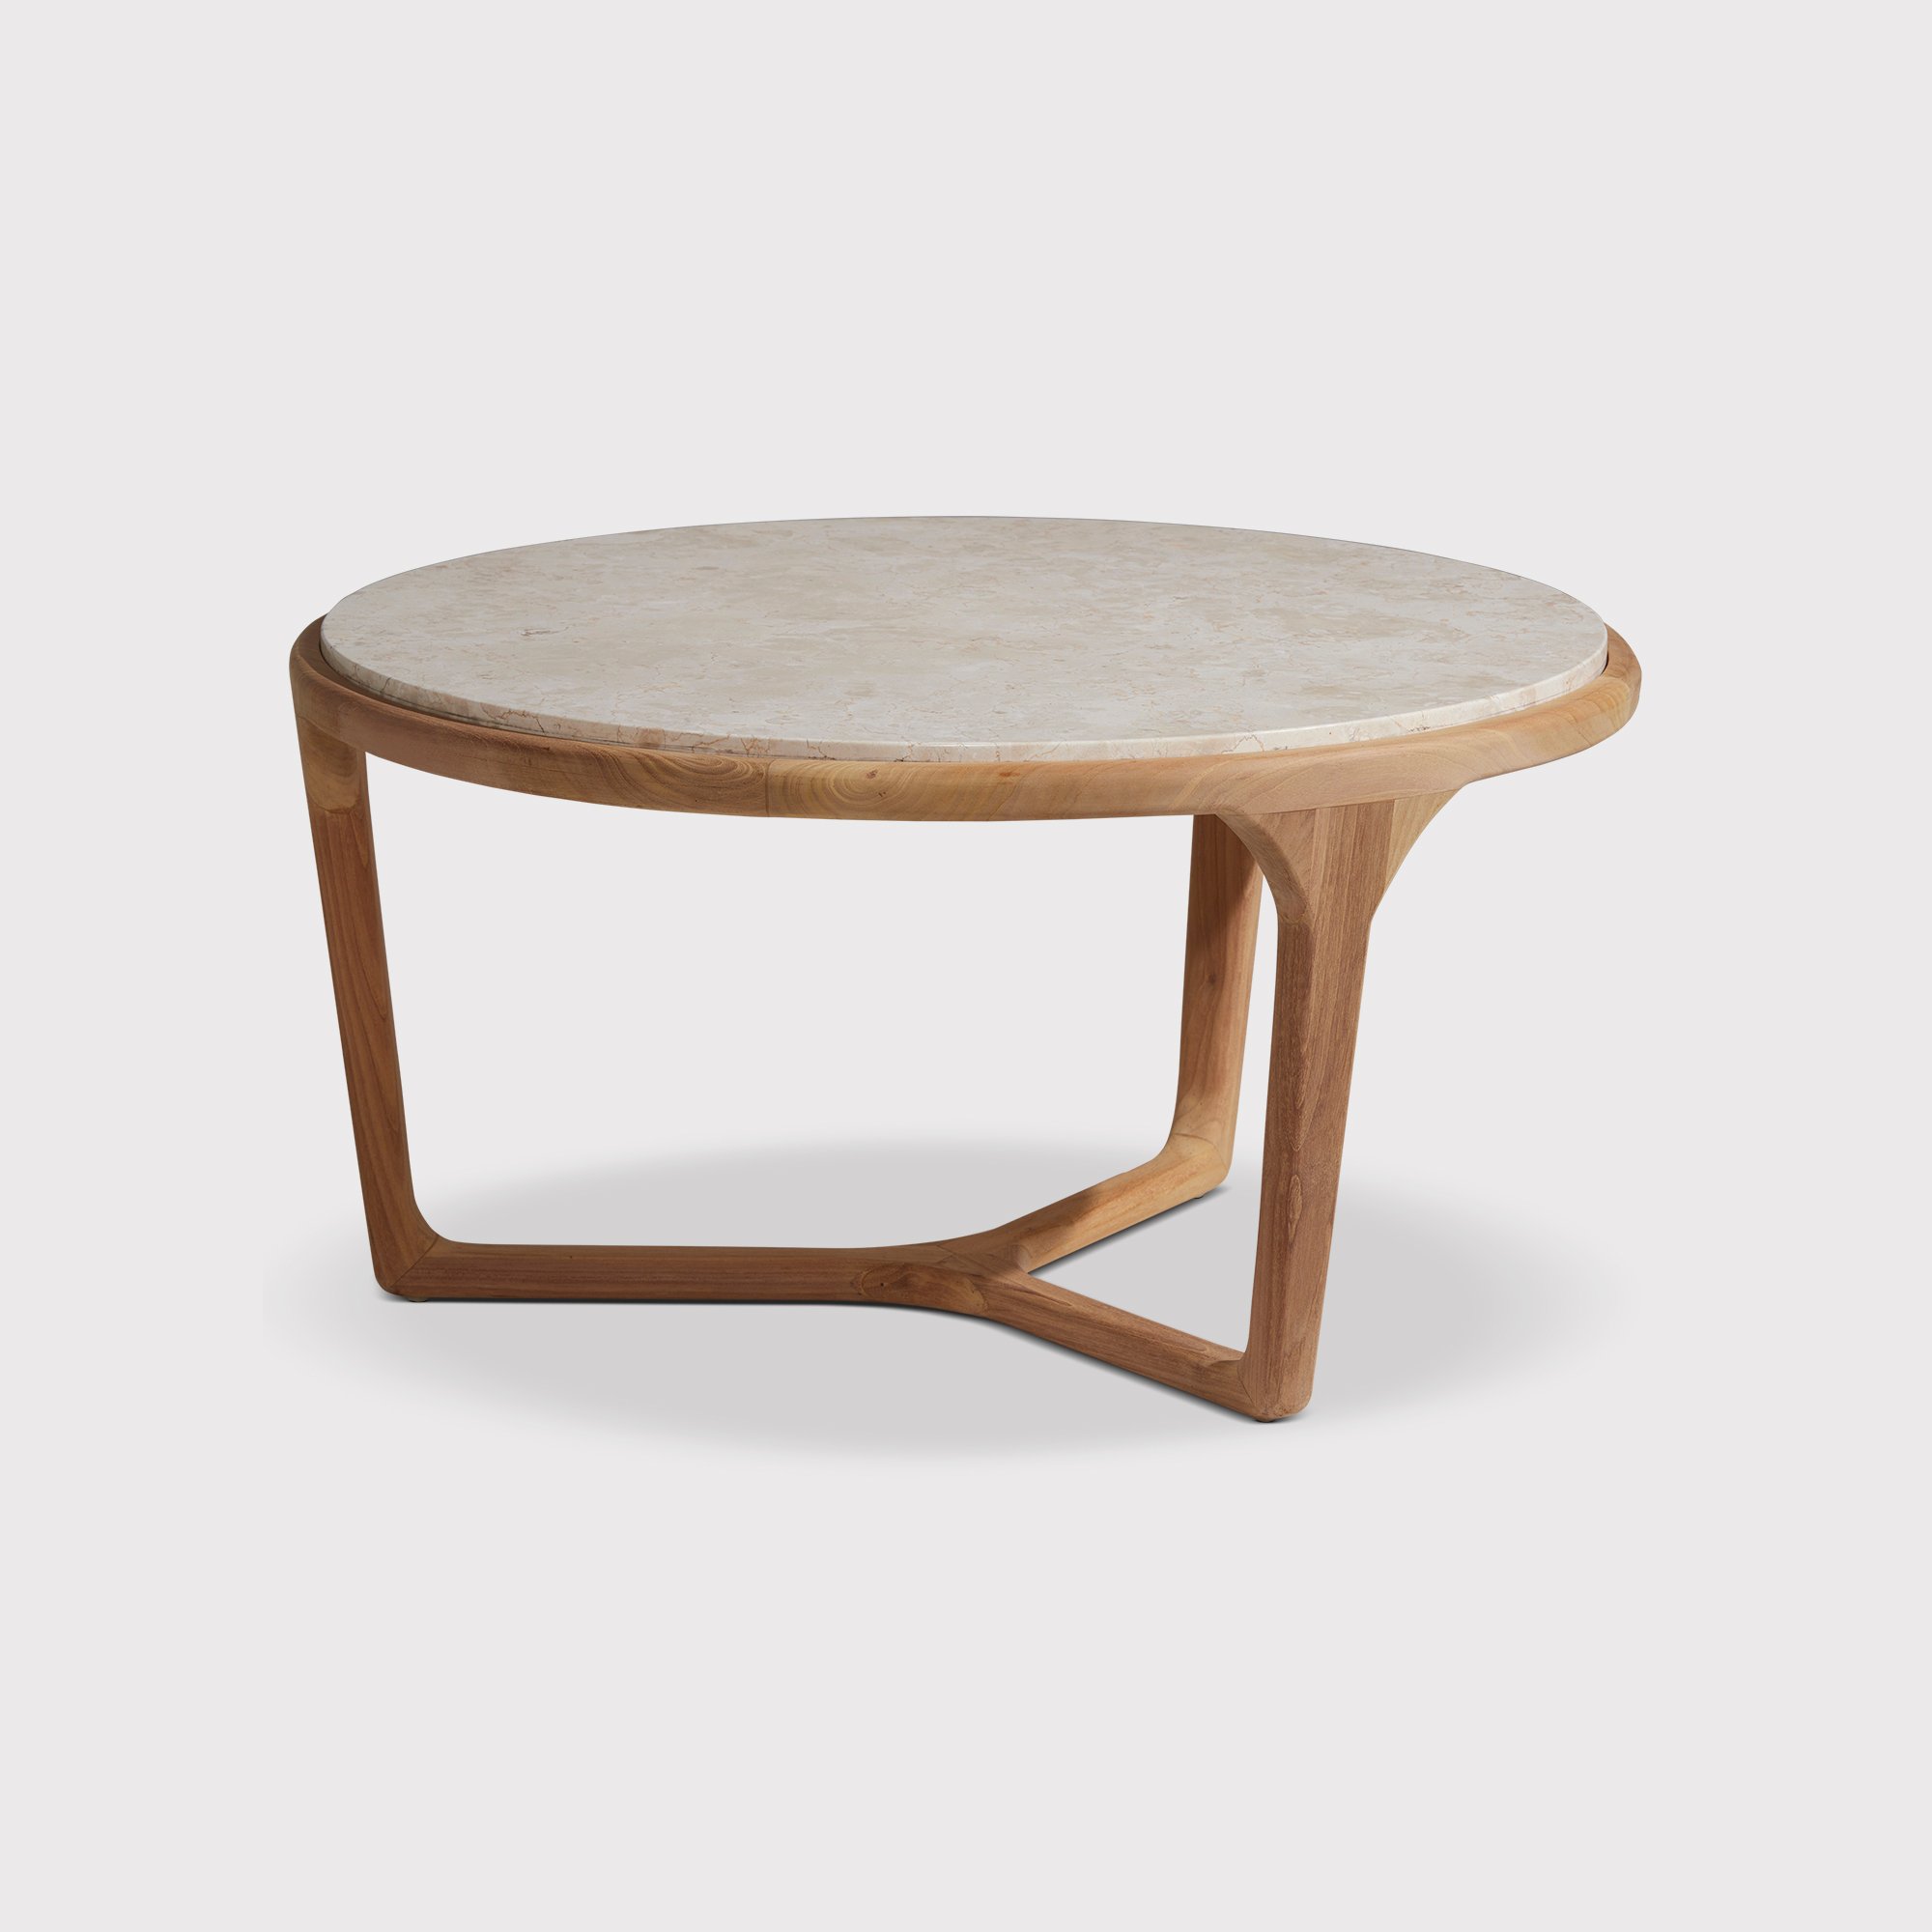 Terza Coffee Table, Round, Brown | Barker & Stonehouse